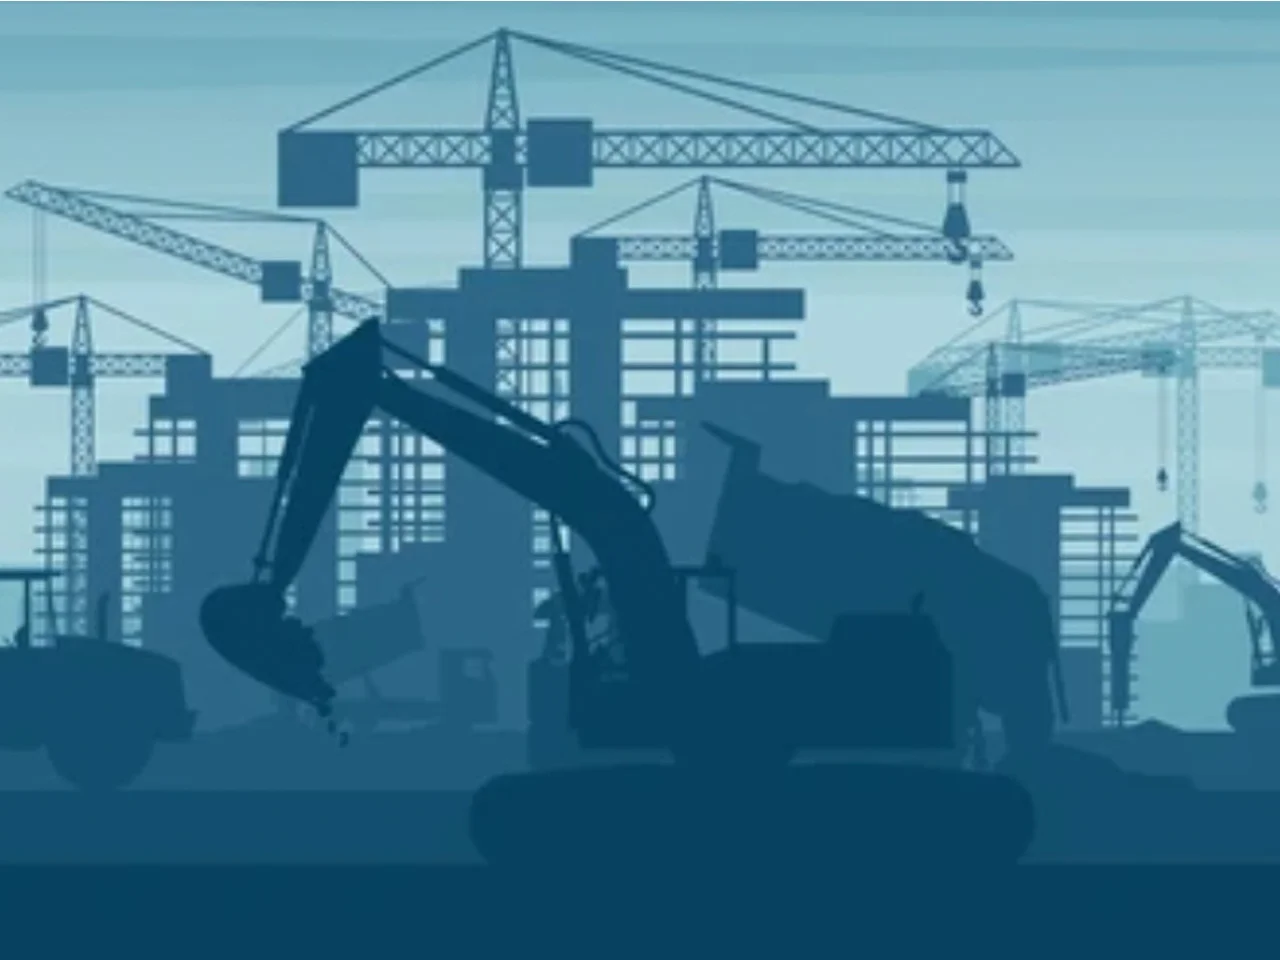 a brief summary of the growth trends of the australian construction machinery market